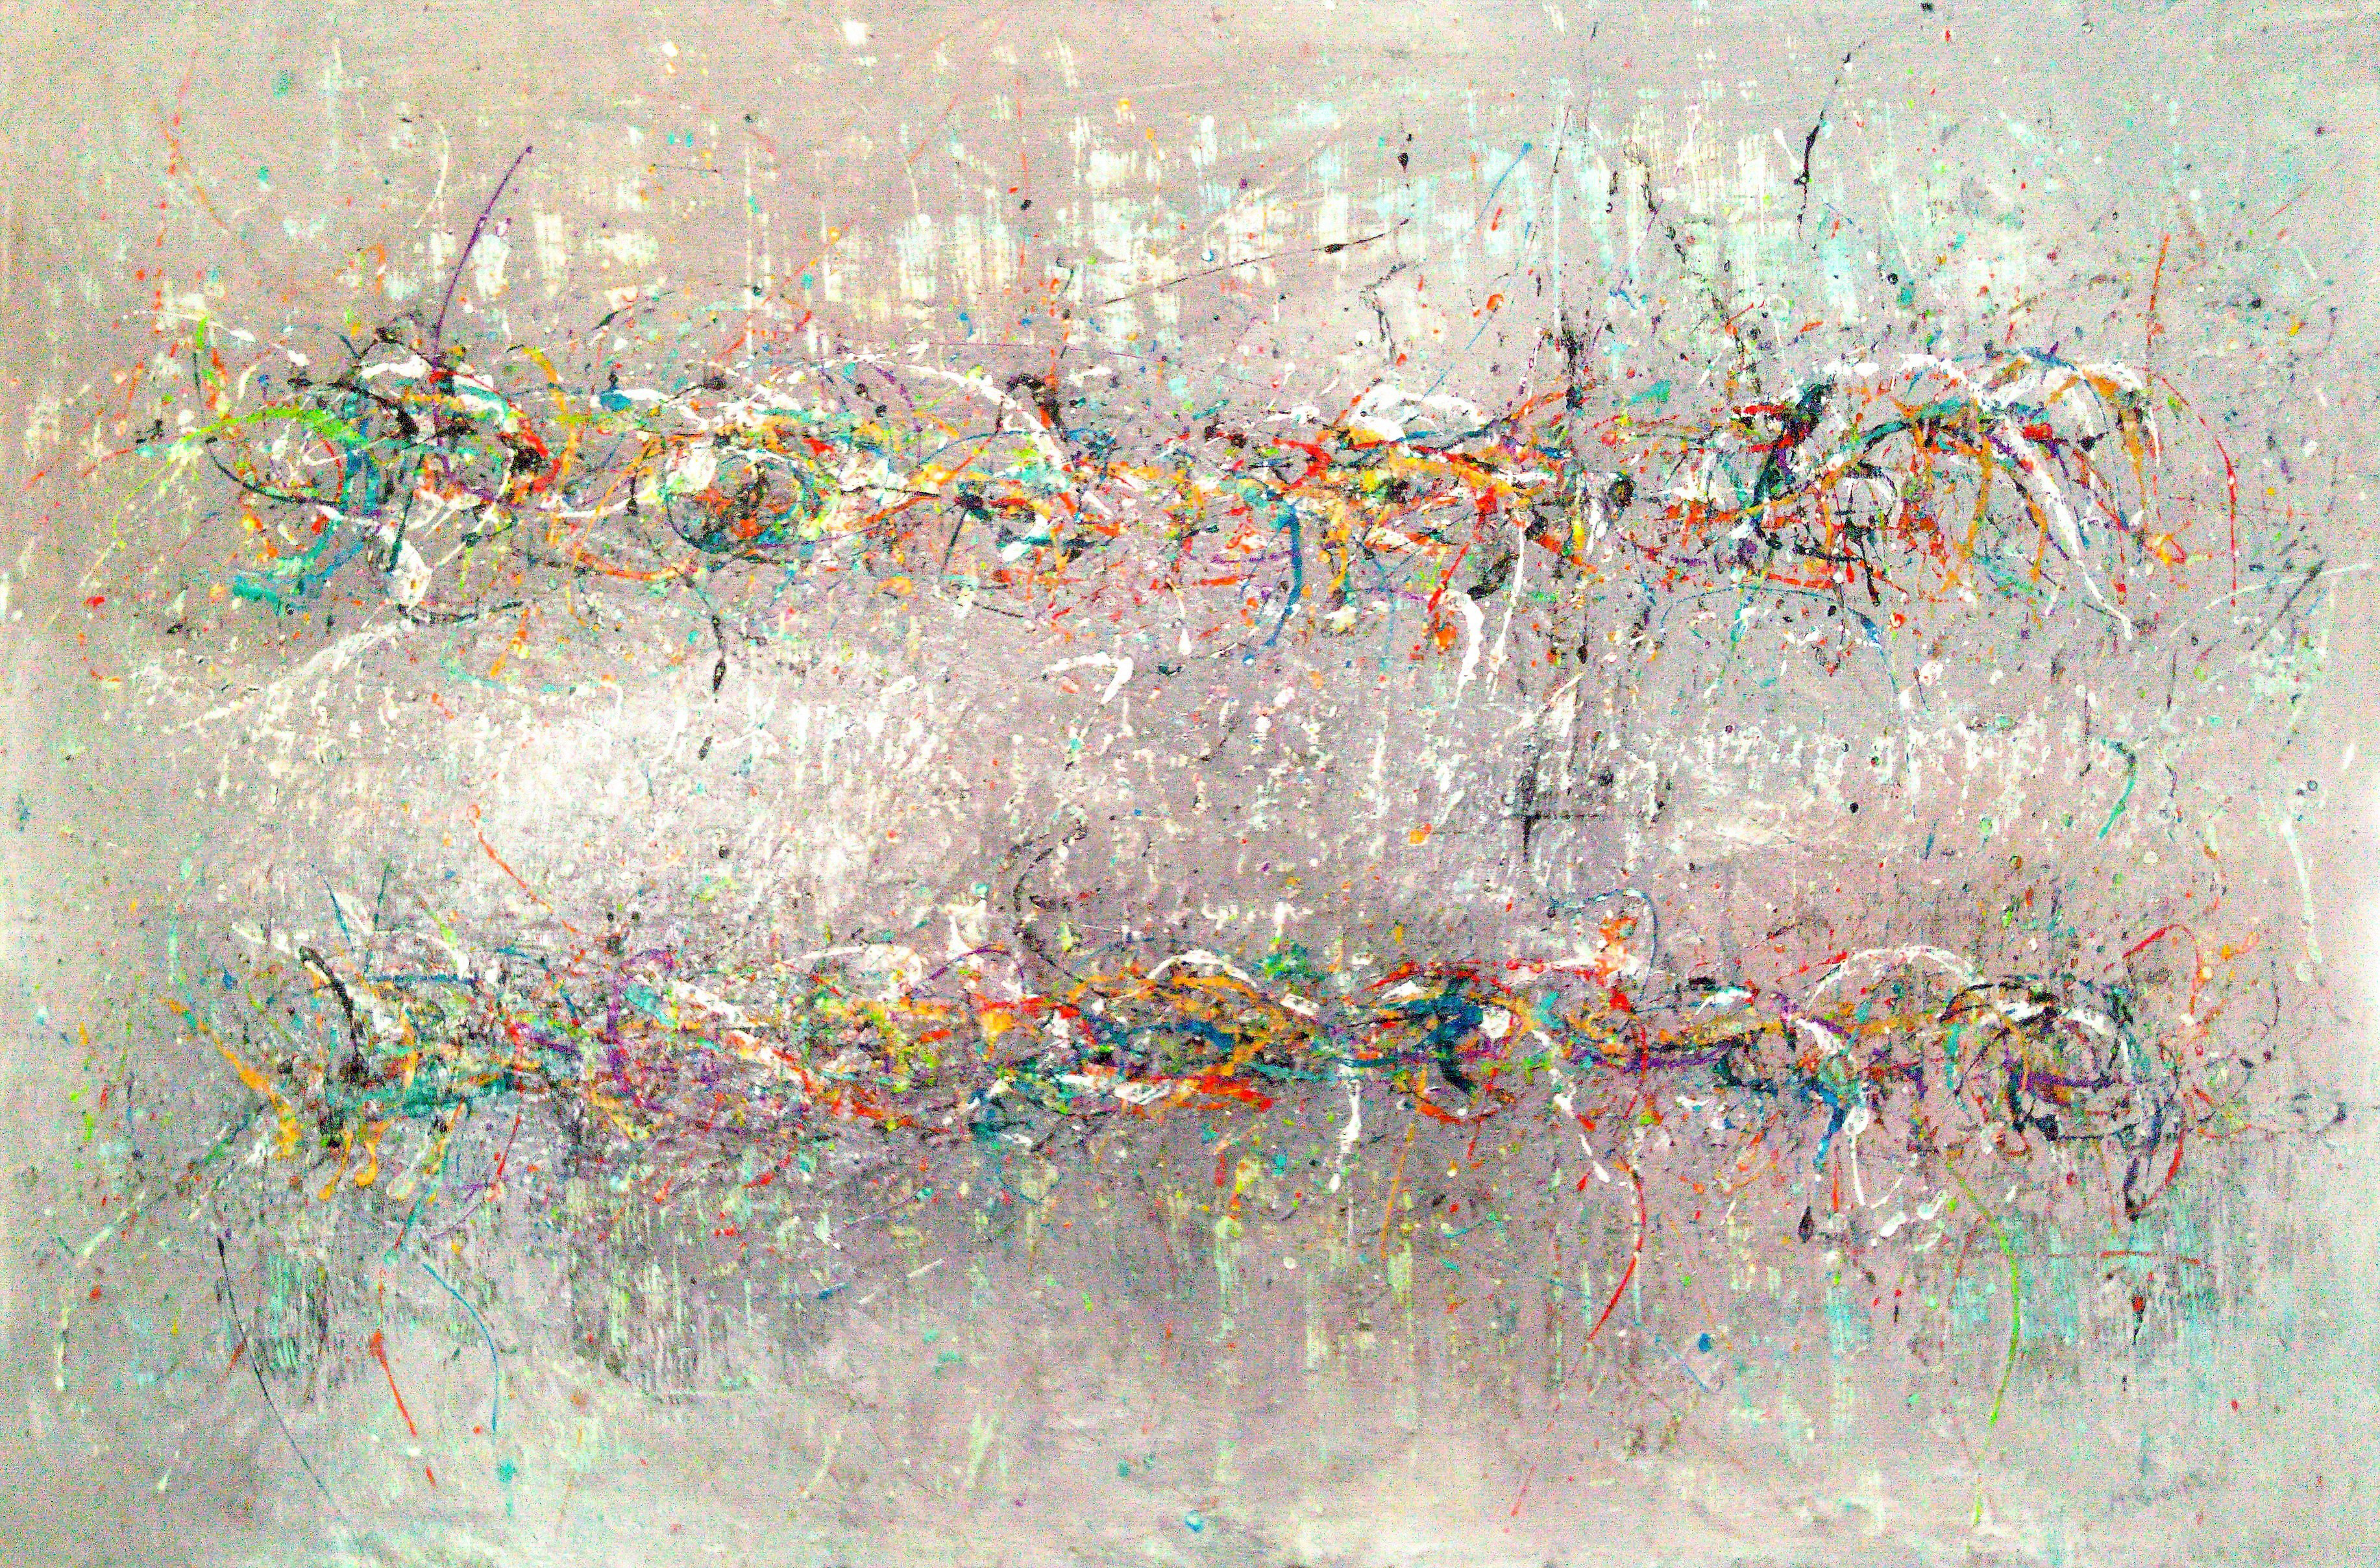 BEYOND
60x40 inches,152x102 centimeters